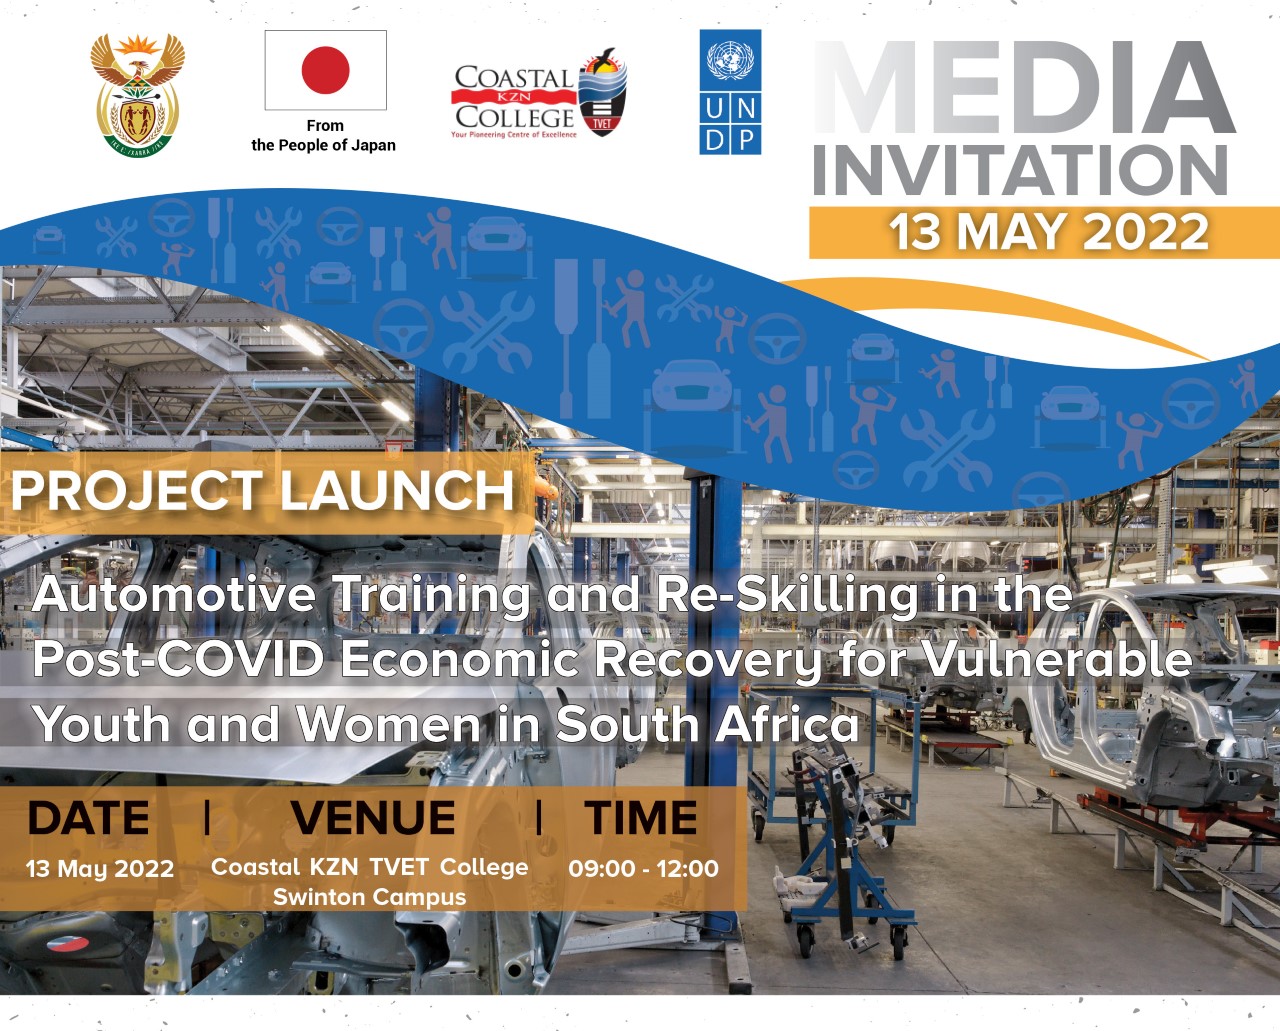 Minister Dr. Blade Nzimande to officially launch the “Automotive Training and Re-Skilling in the Post-COVID Economic Recovery for Vulnerable Youth and Women in South Africa” project at the Coastal KZN TVET College